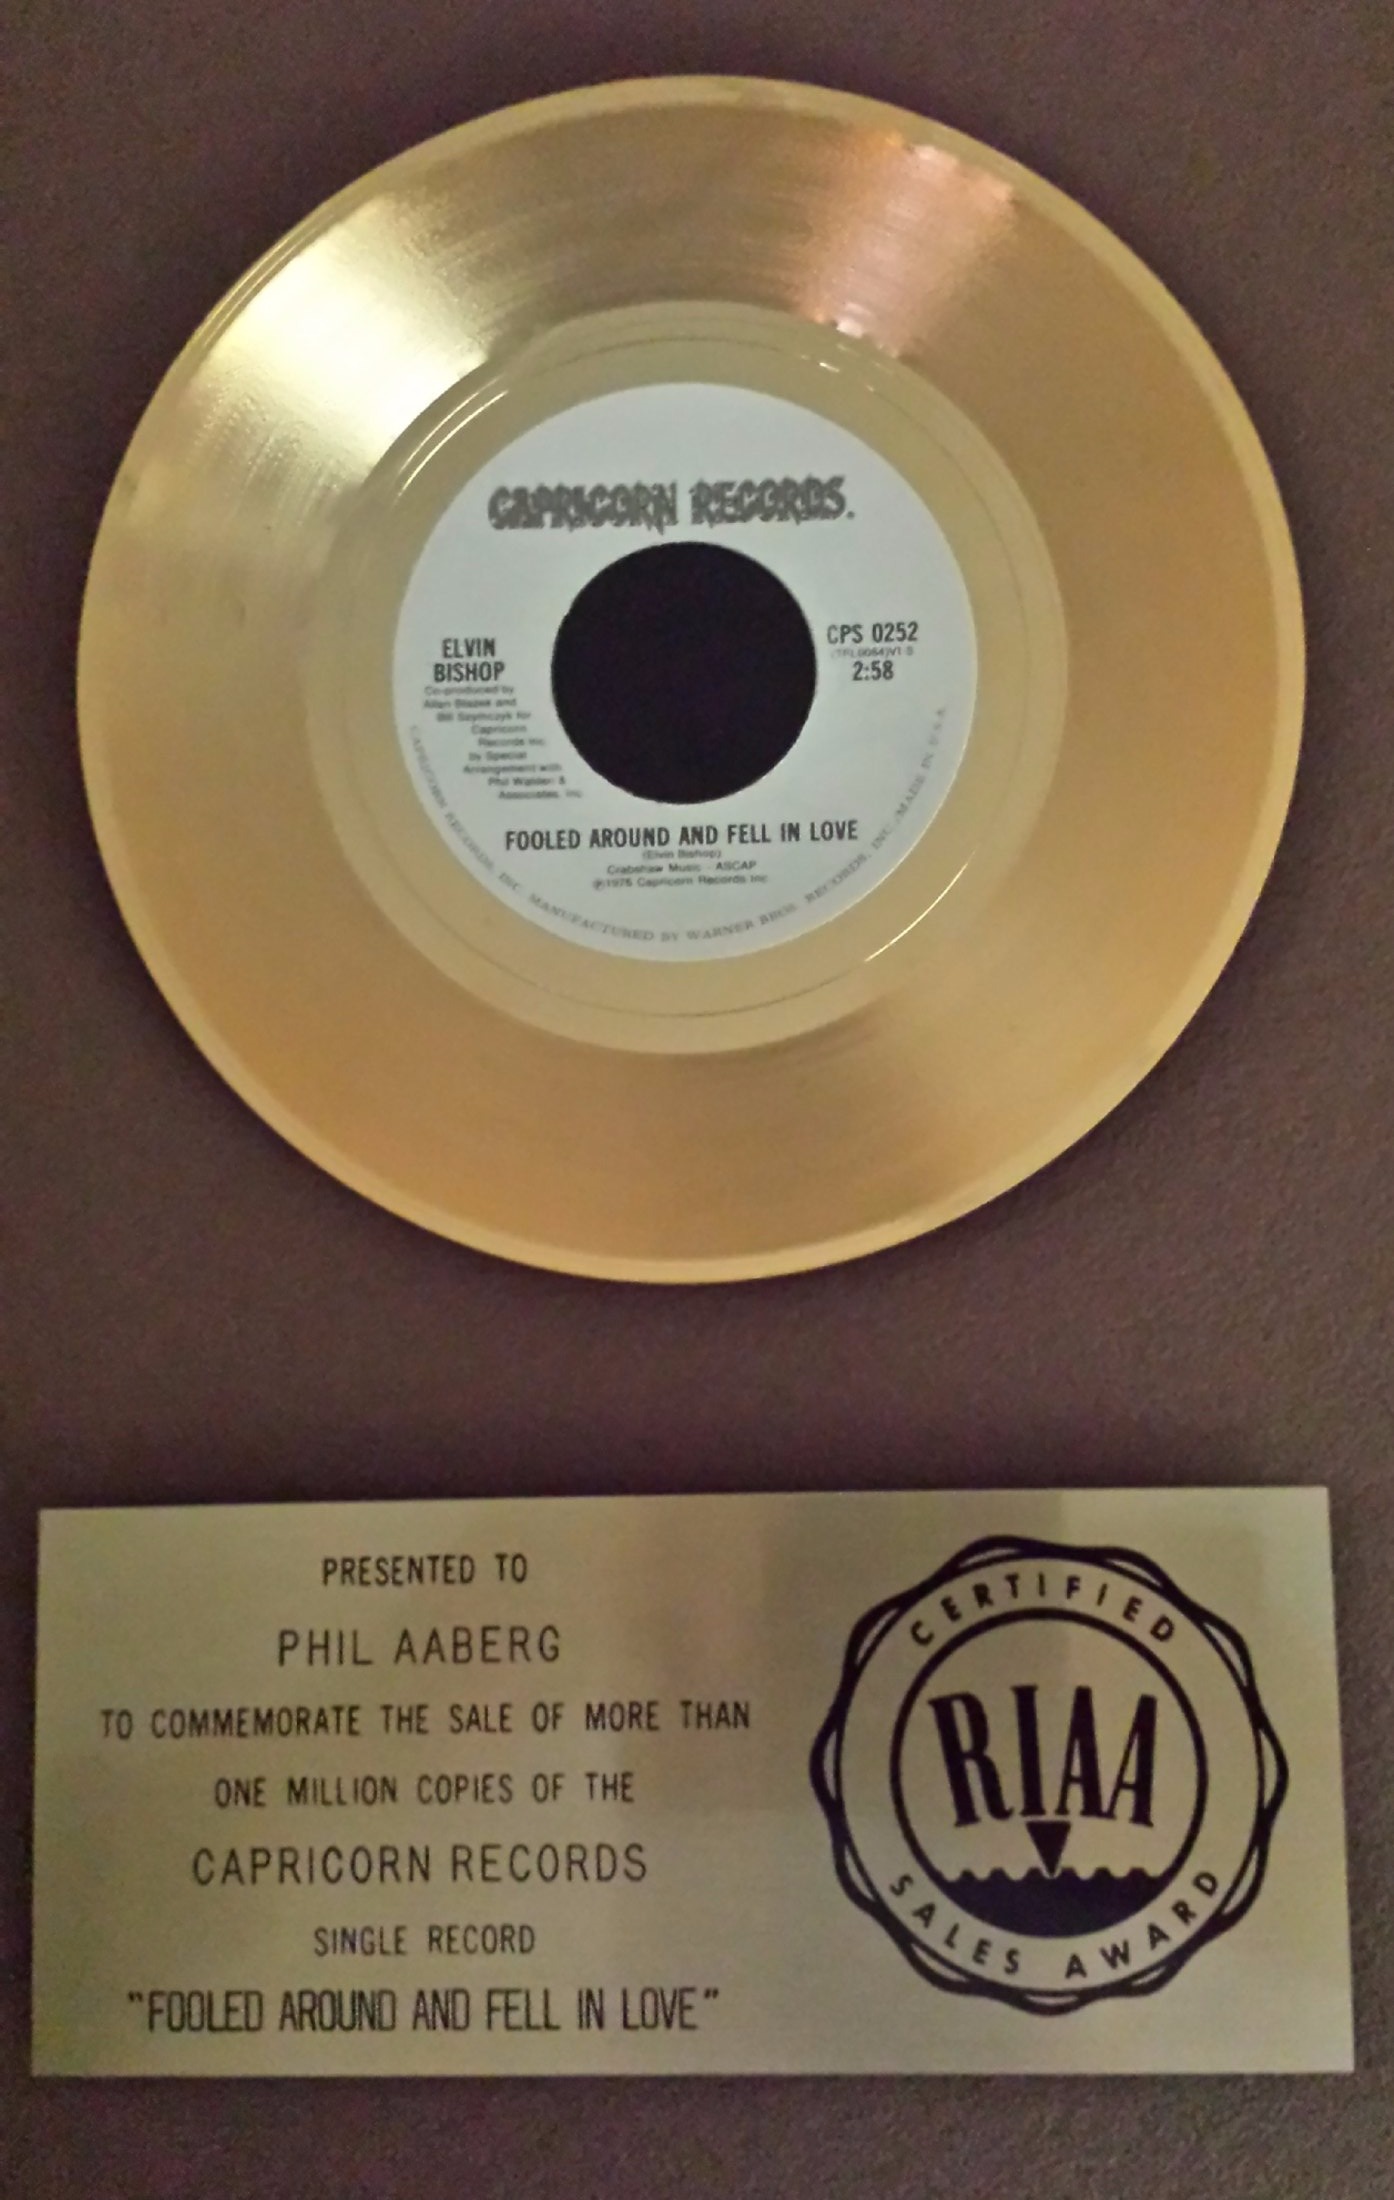 Philip Aaberg - Gold Record